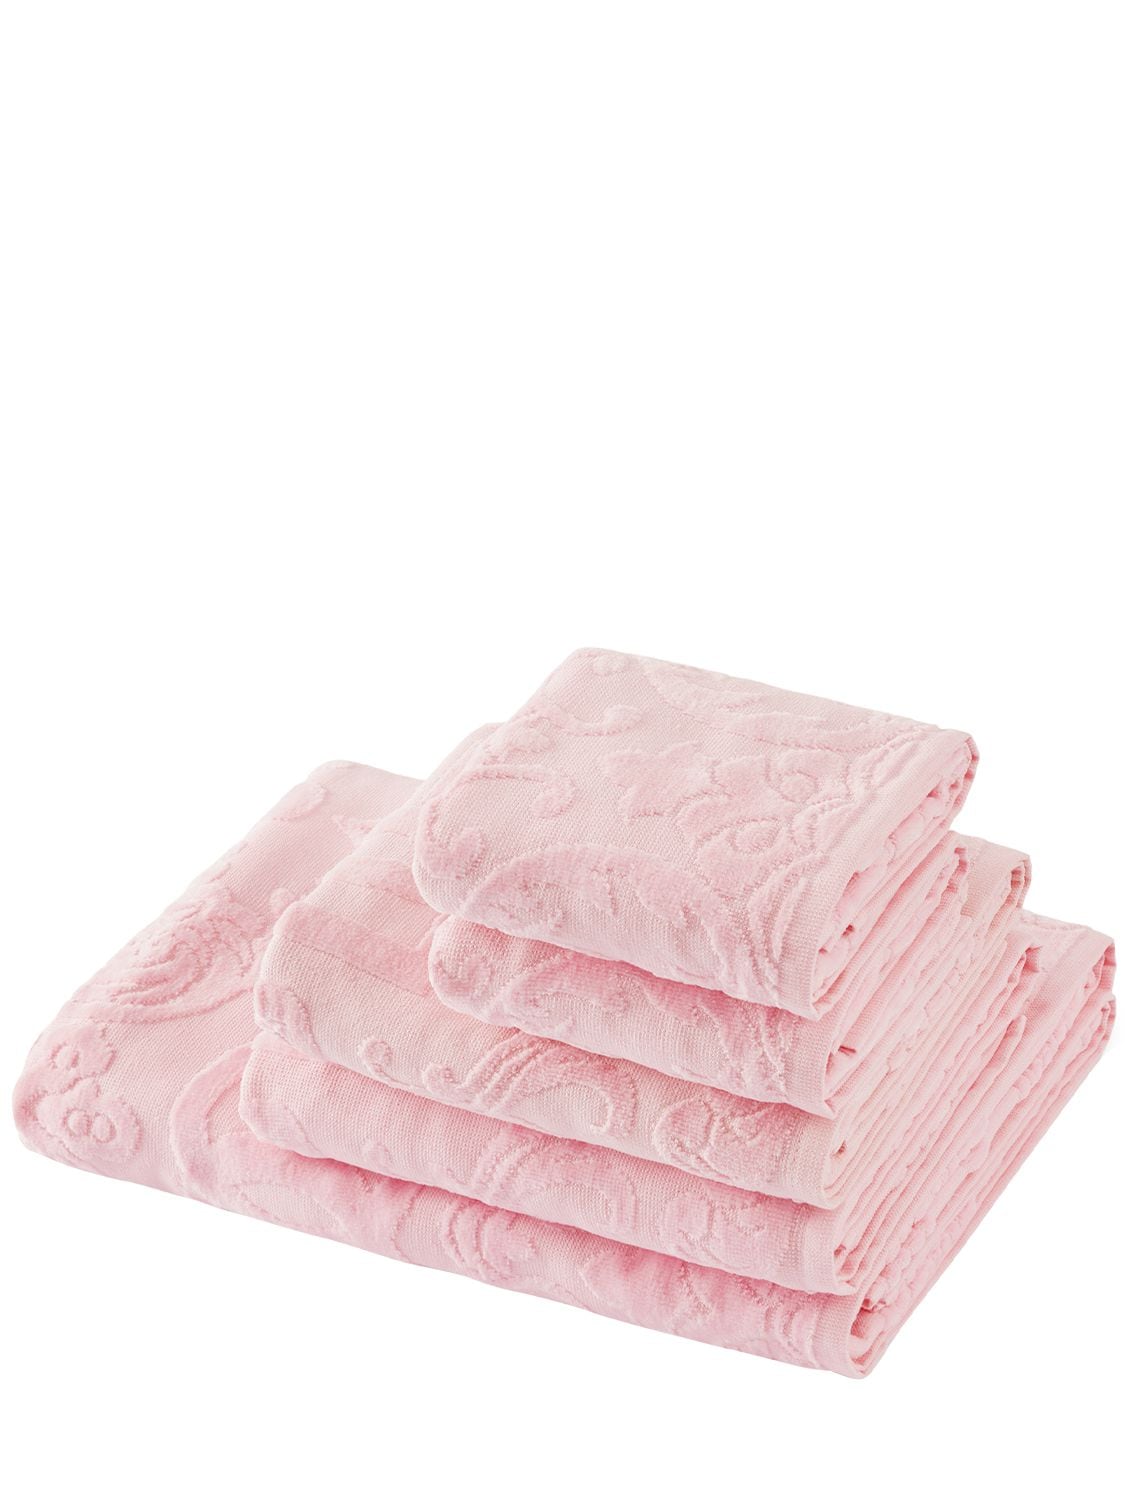 Dolce & Gabbana Set Of 5 Cotton Jacquard Towels In Pink